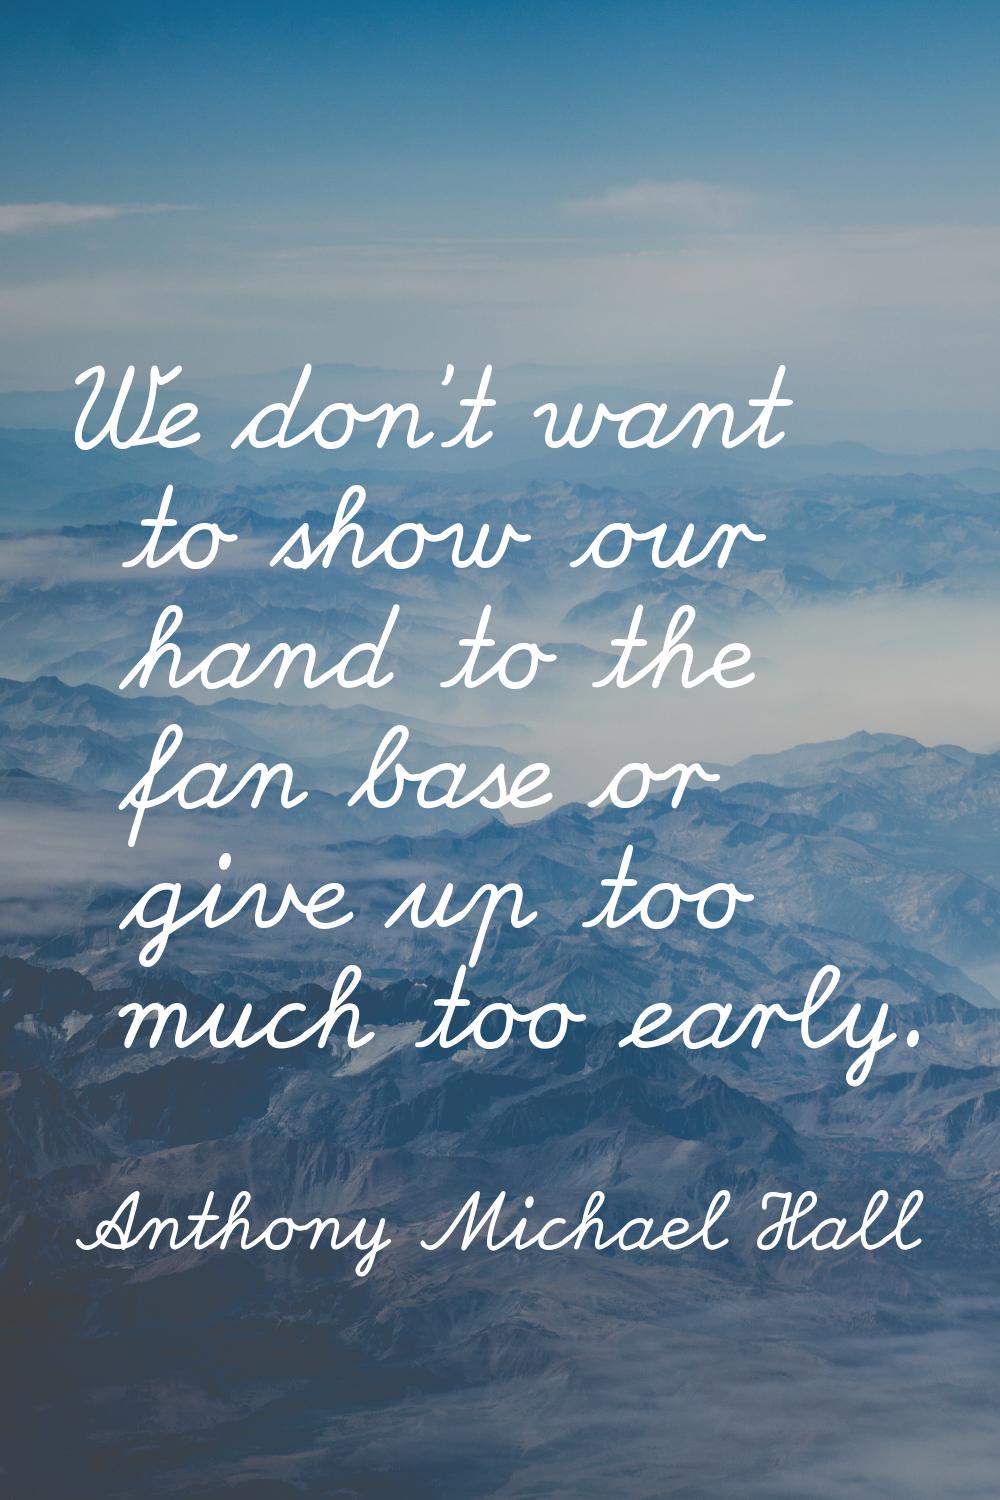 We don't want to show our hand to the fan base or give up too much too early.